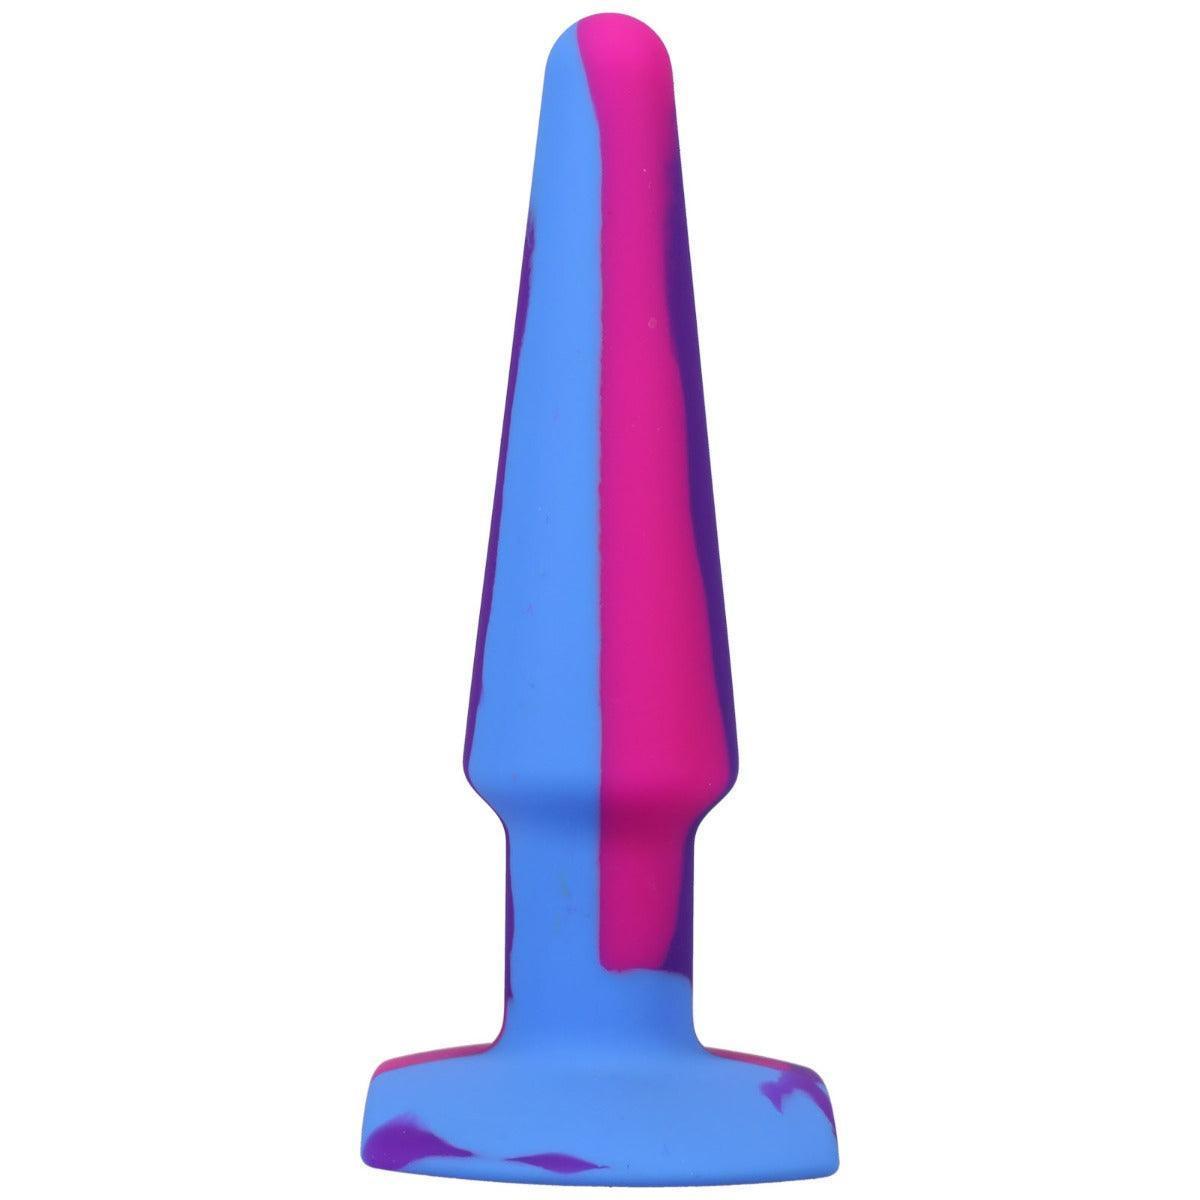 A-Play - Groovy - Silicone Anal Plug - 5 inch Berry Multi-coloured